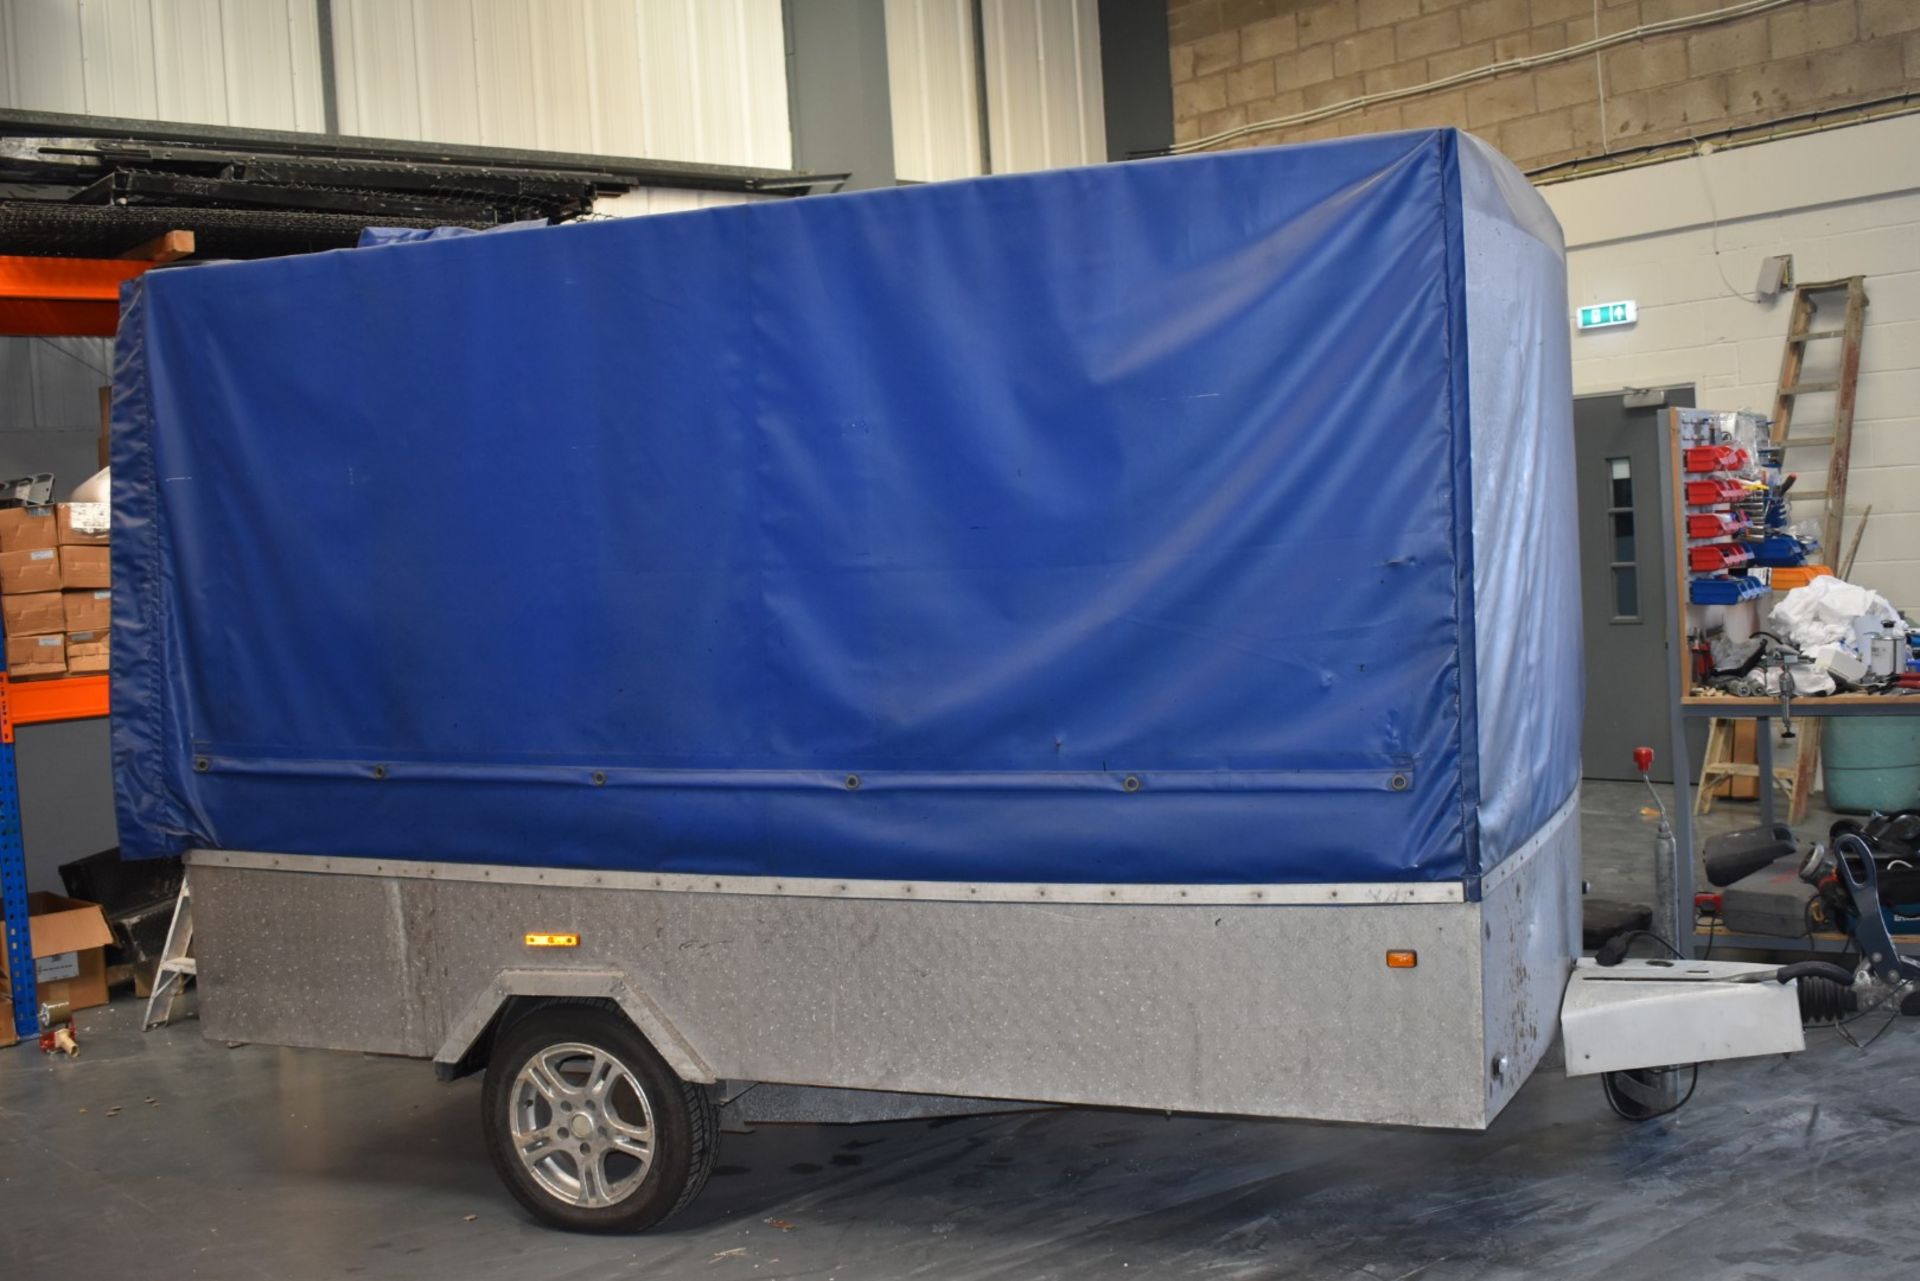 1 x Customised 10x6ft Tow Trailer With Aluminium Frame Enclosure and Heavy Duty Cover, BP WS3000 - Image 2 of 13